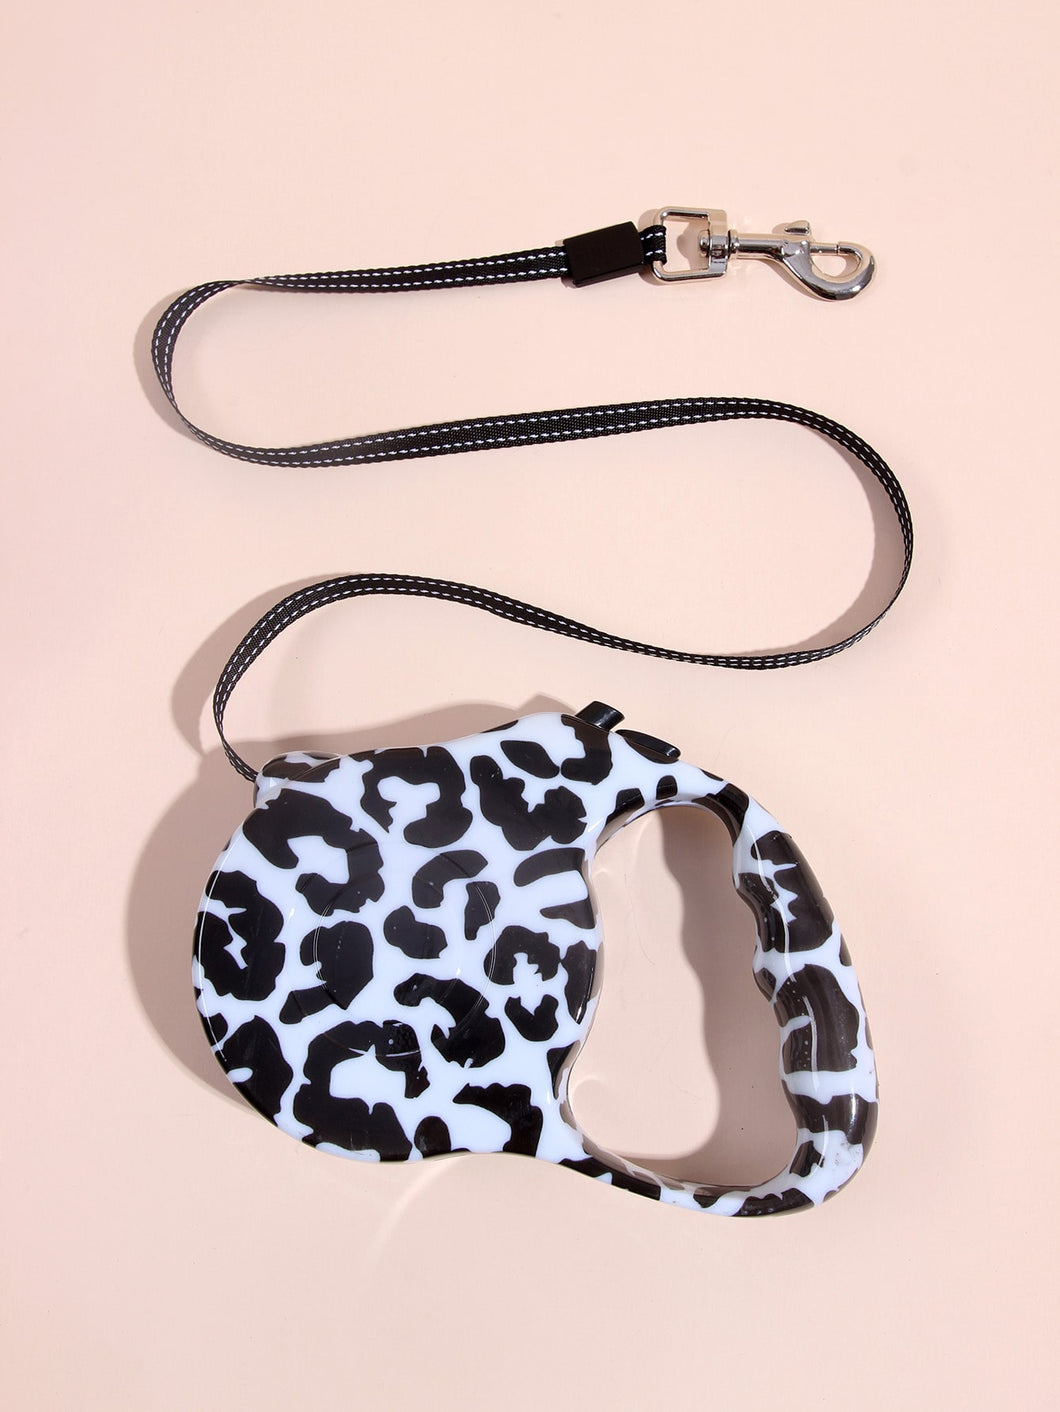 'Leopard Retractable Dog Leash' Keep your pet friend on a leash. Stay safe, be trendy! Colour: Black and White Pattern Type: Leopard Material: Polyester Applicable Pet: Cat/Dog